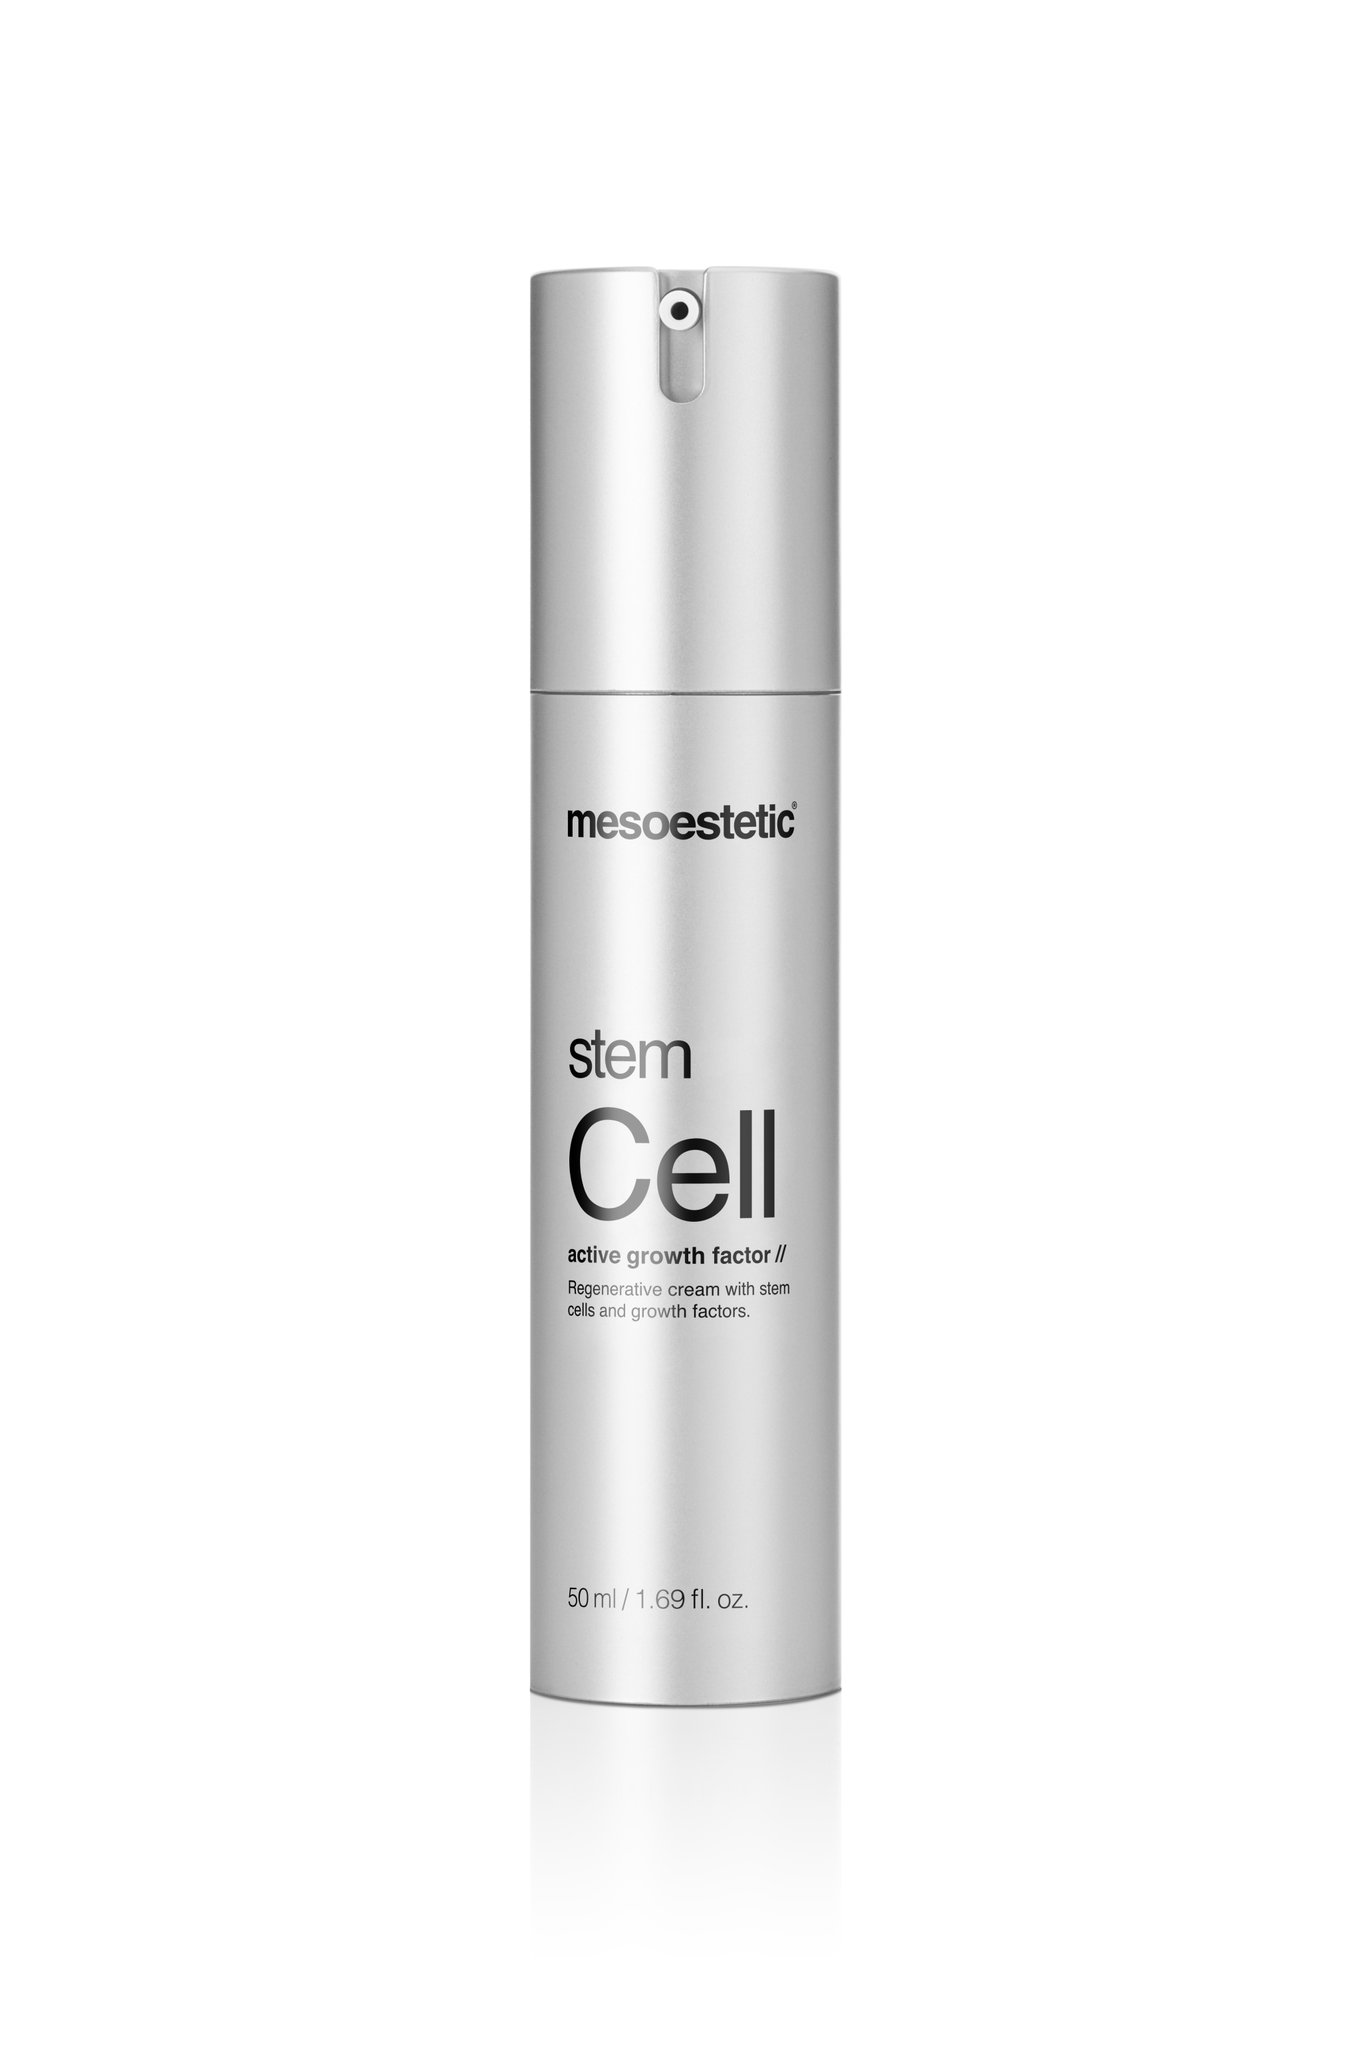 Mesoestetic Stem cell active growth factor